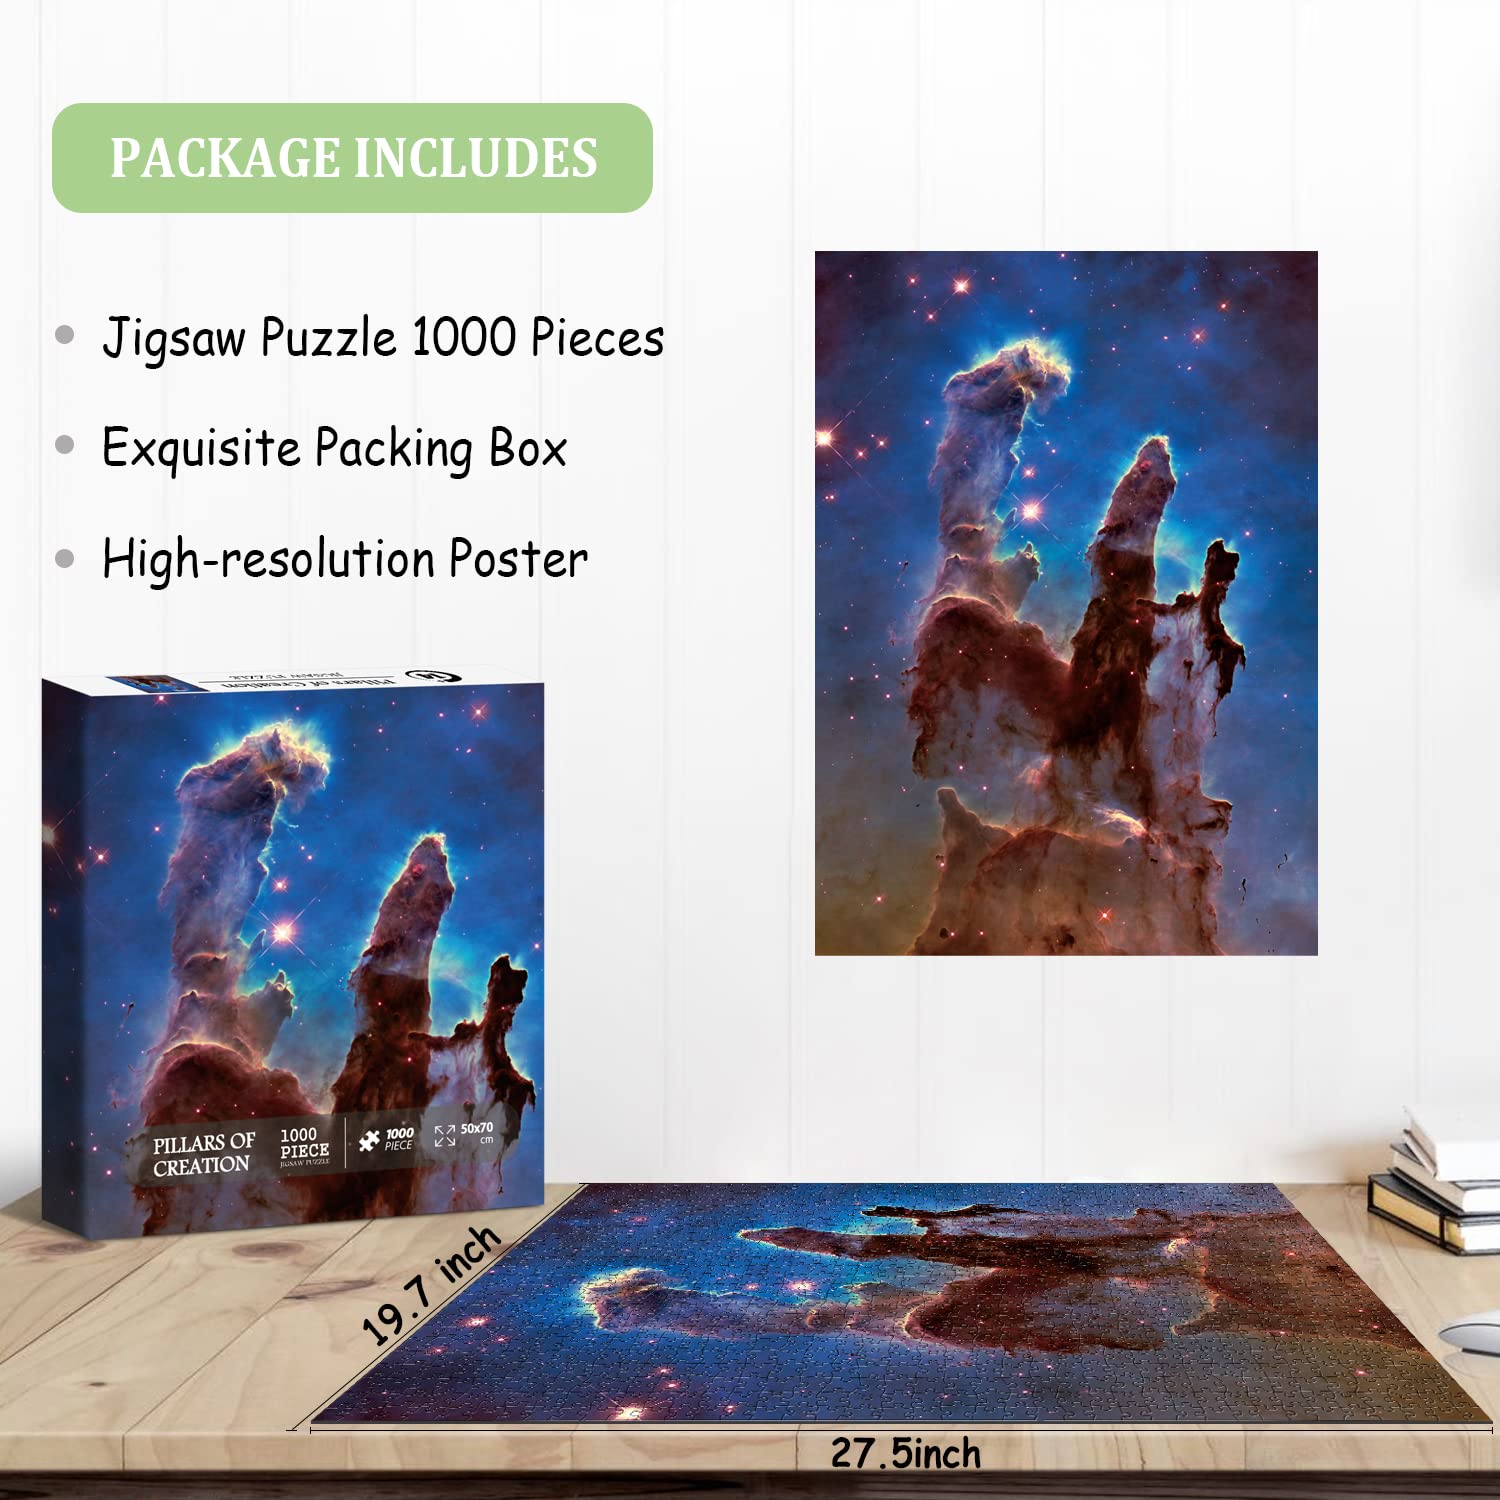 Pillars Of Creation Jigsaw Puzzle 1000 Pieces